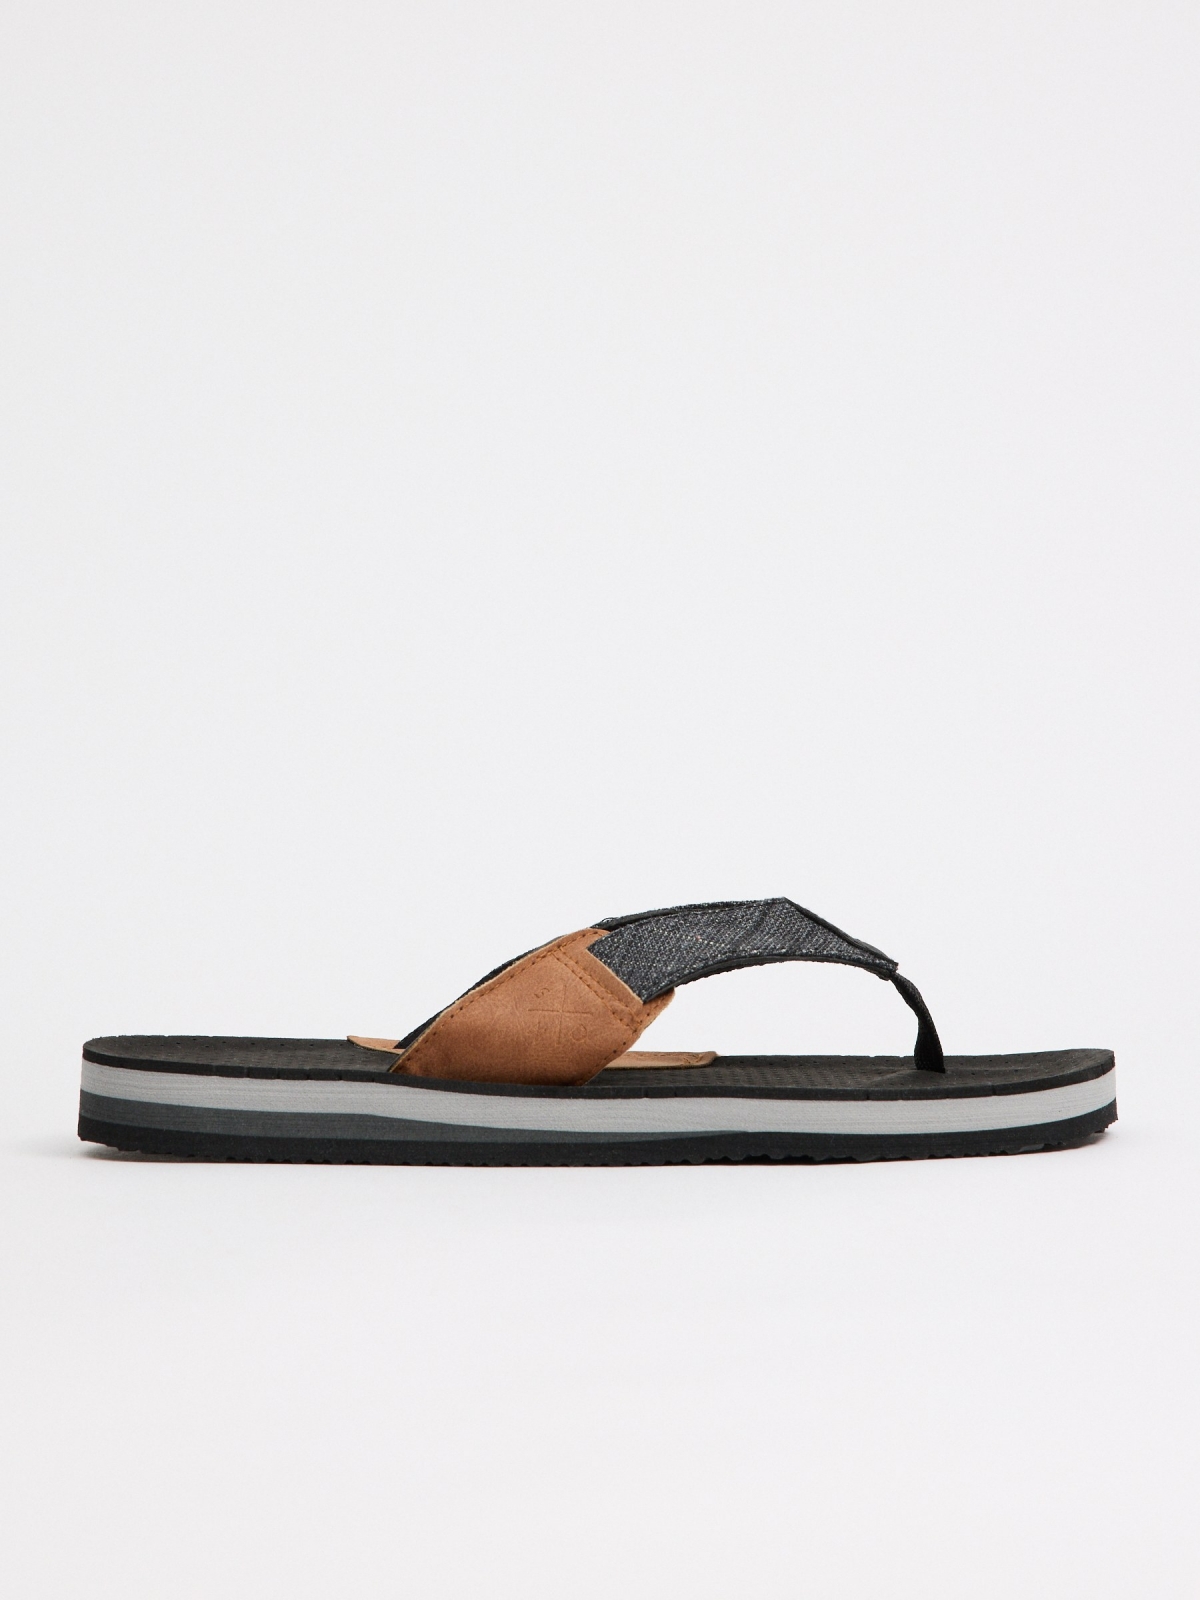 Combined fabric toe flip flops black lateral view